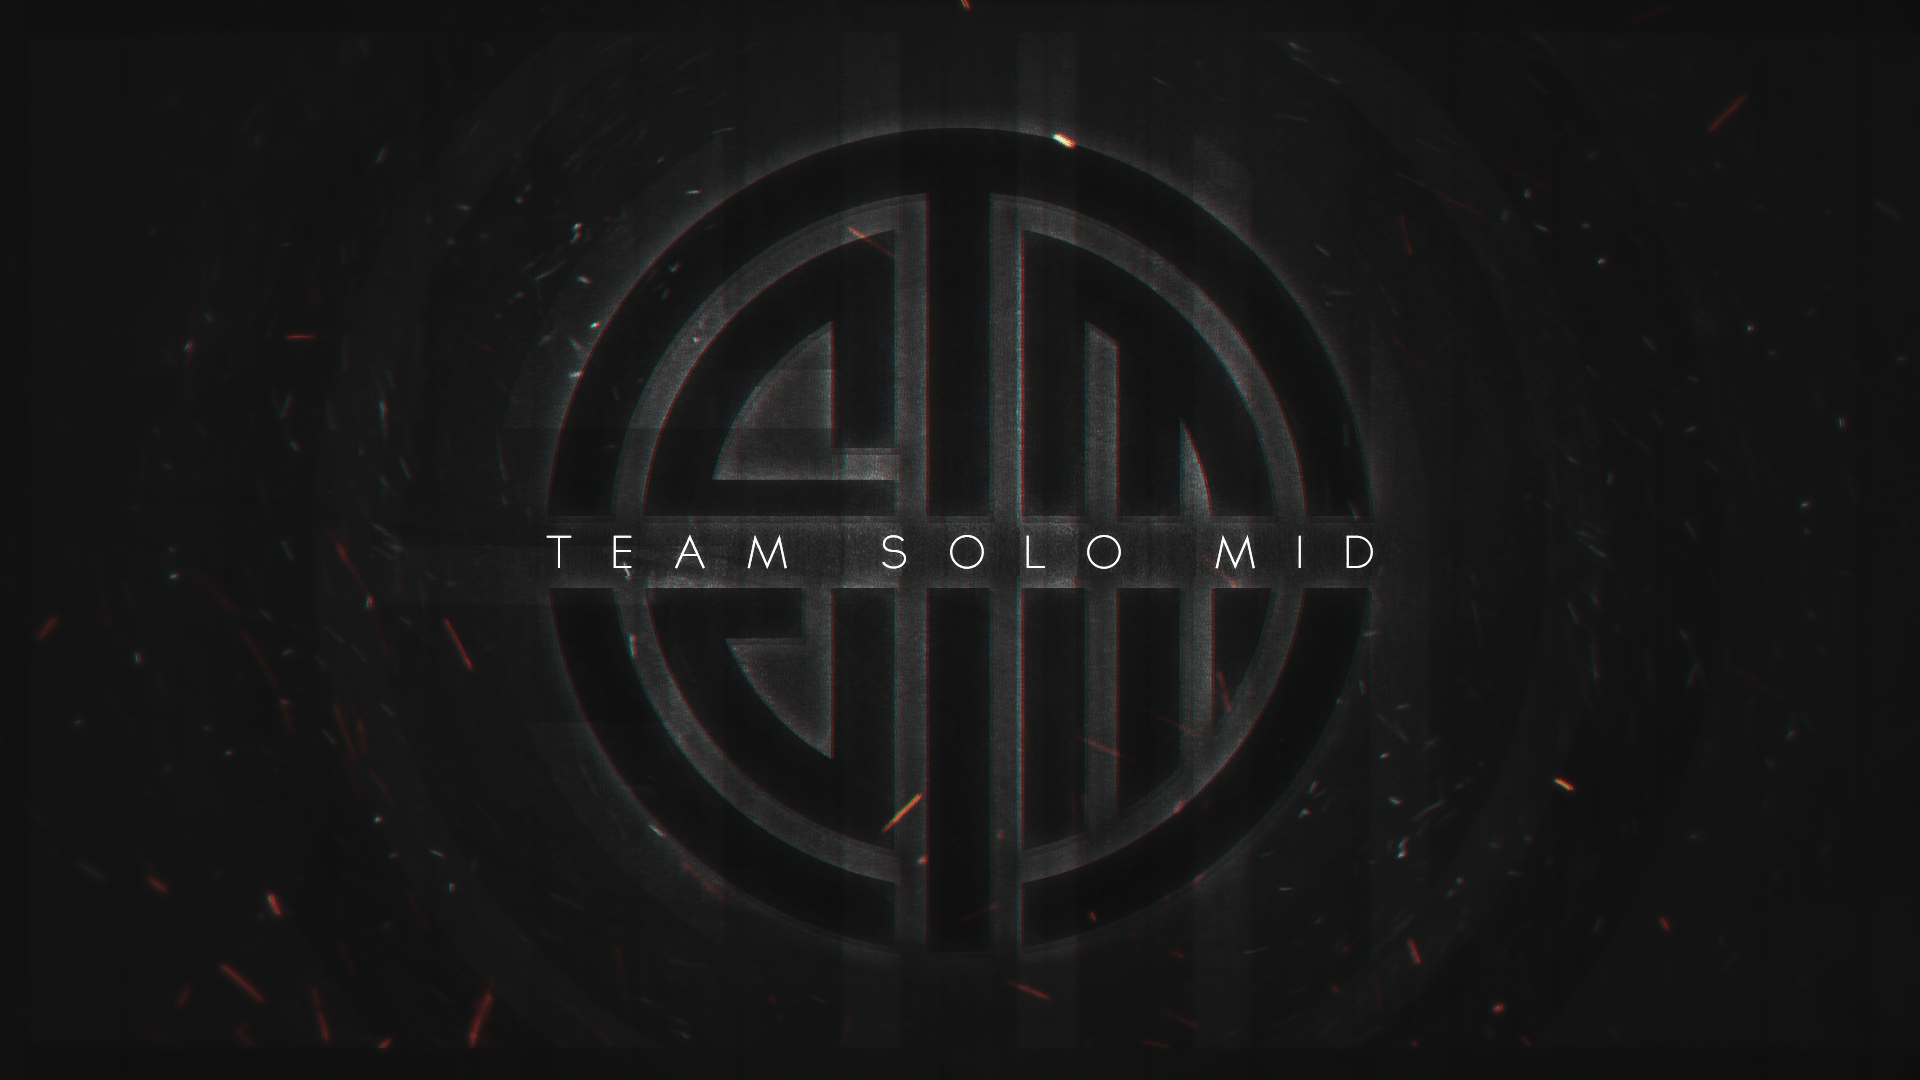 Team Solomid 1920X1080 Wallpapers